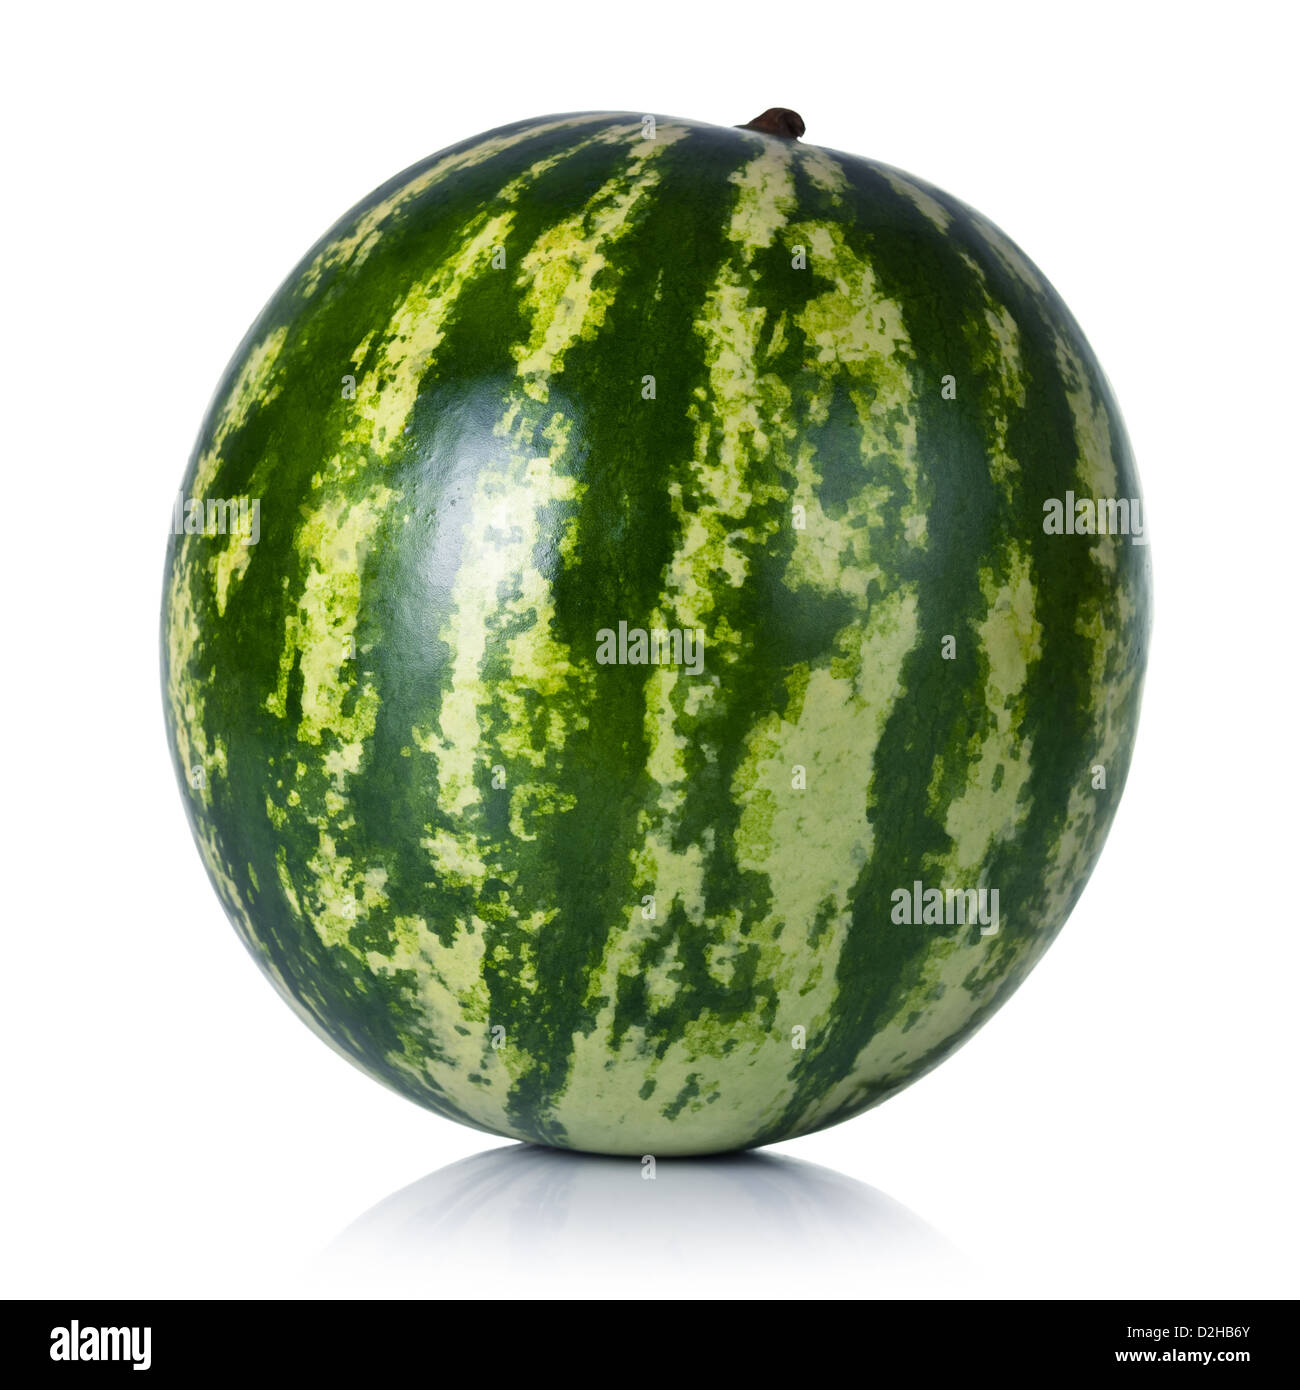 Watermelon on white background. Fresh and juicy Stock Photo